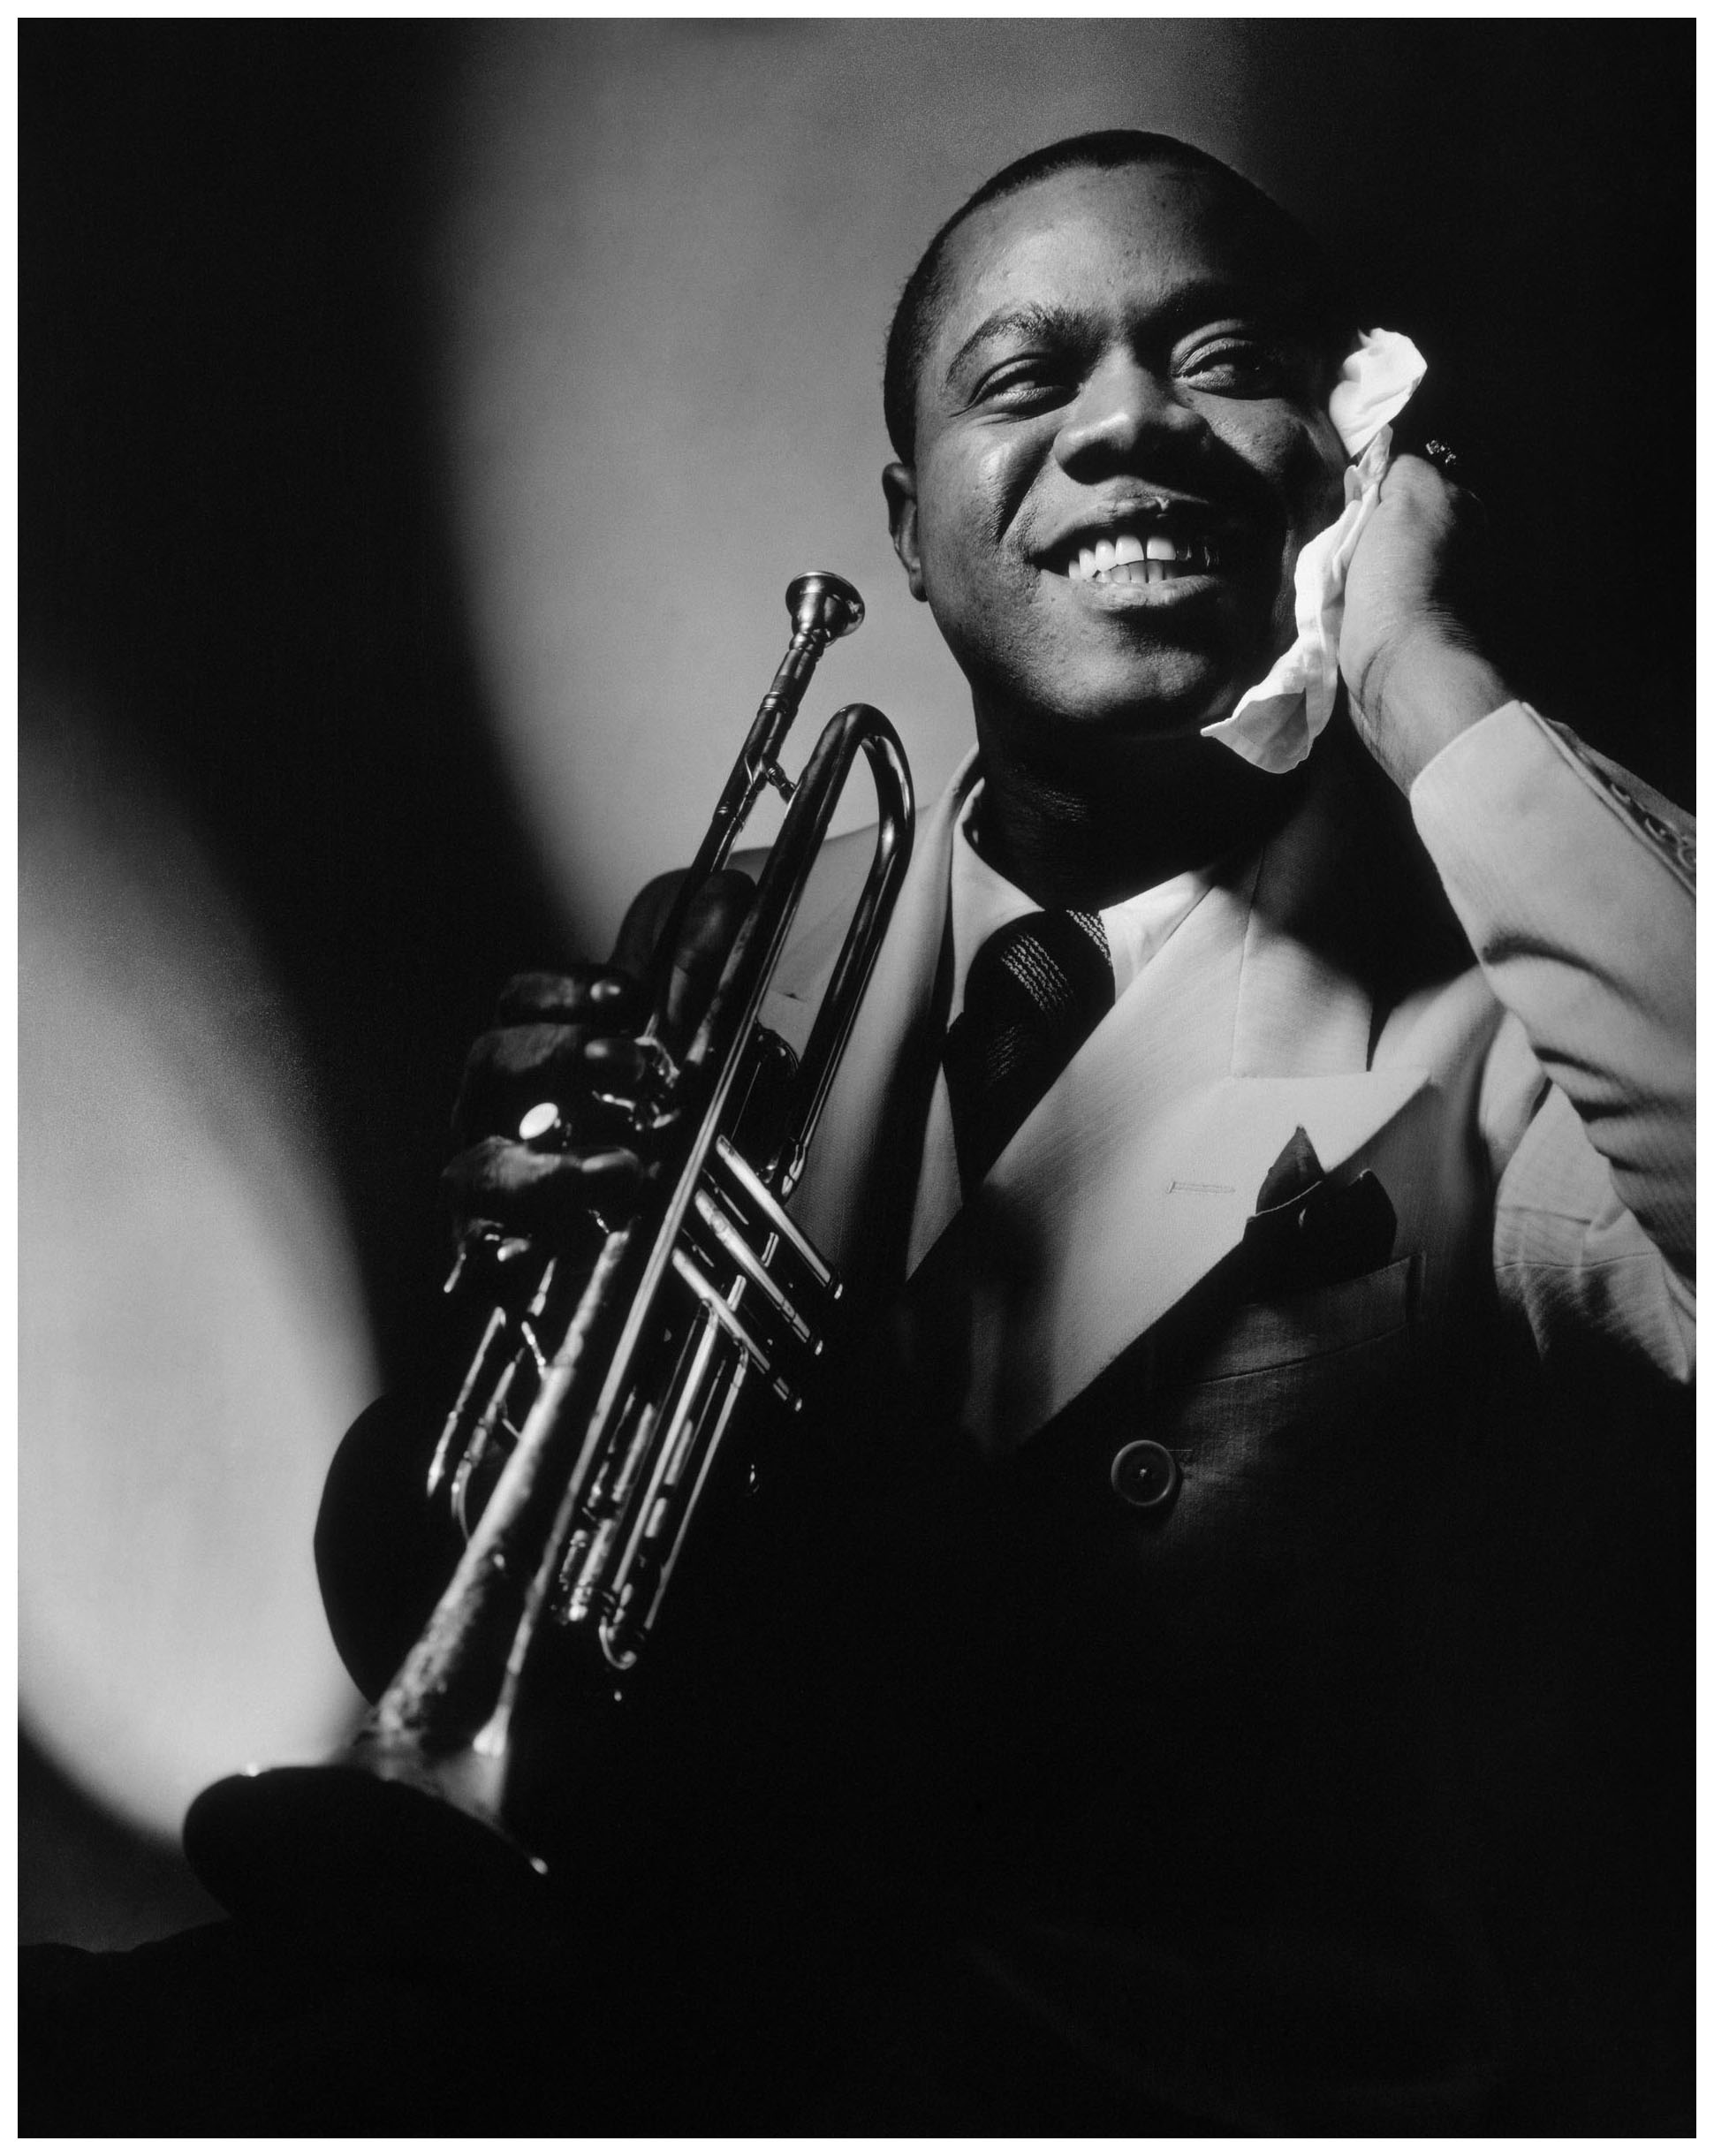 Louis Armstrong is a man who needs no introduction. So I’ll try to keep this short.